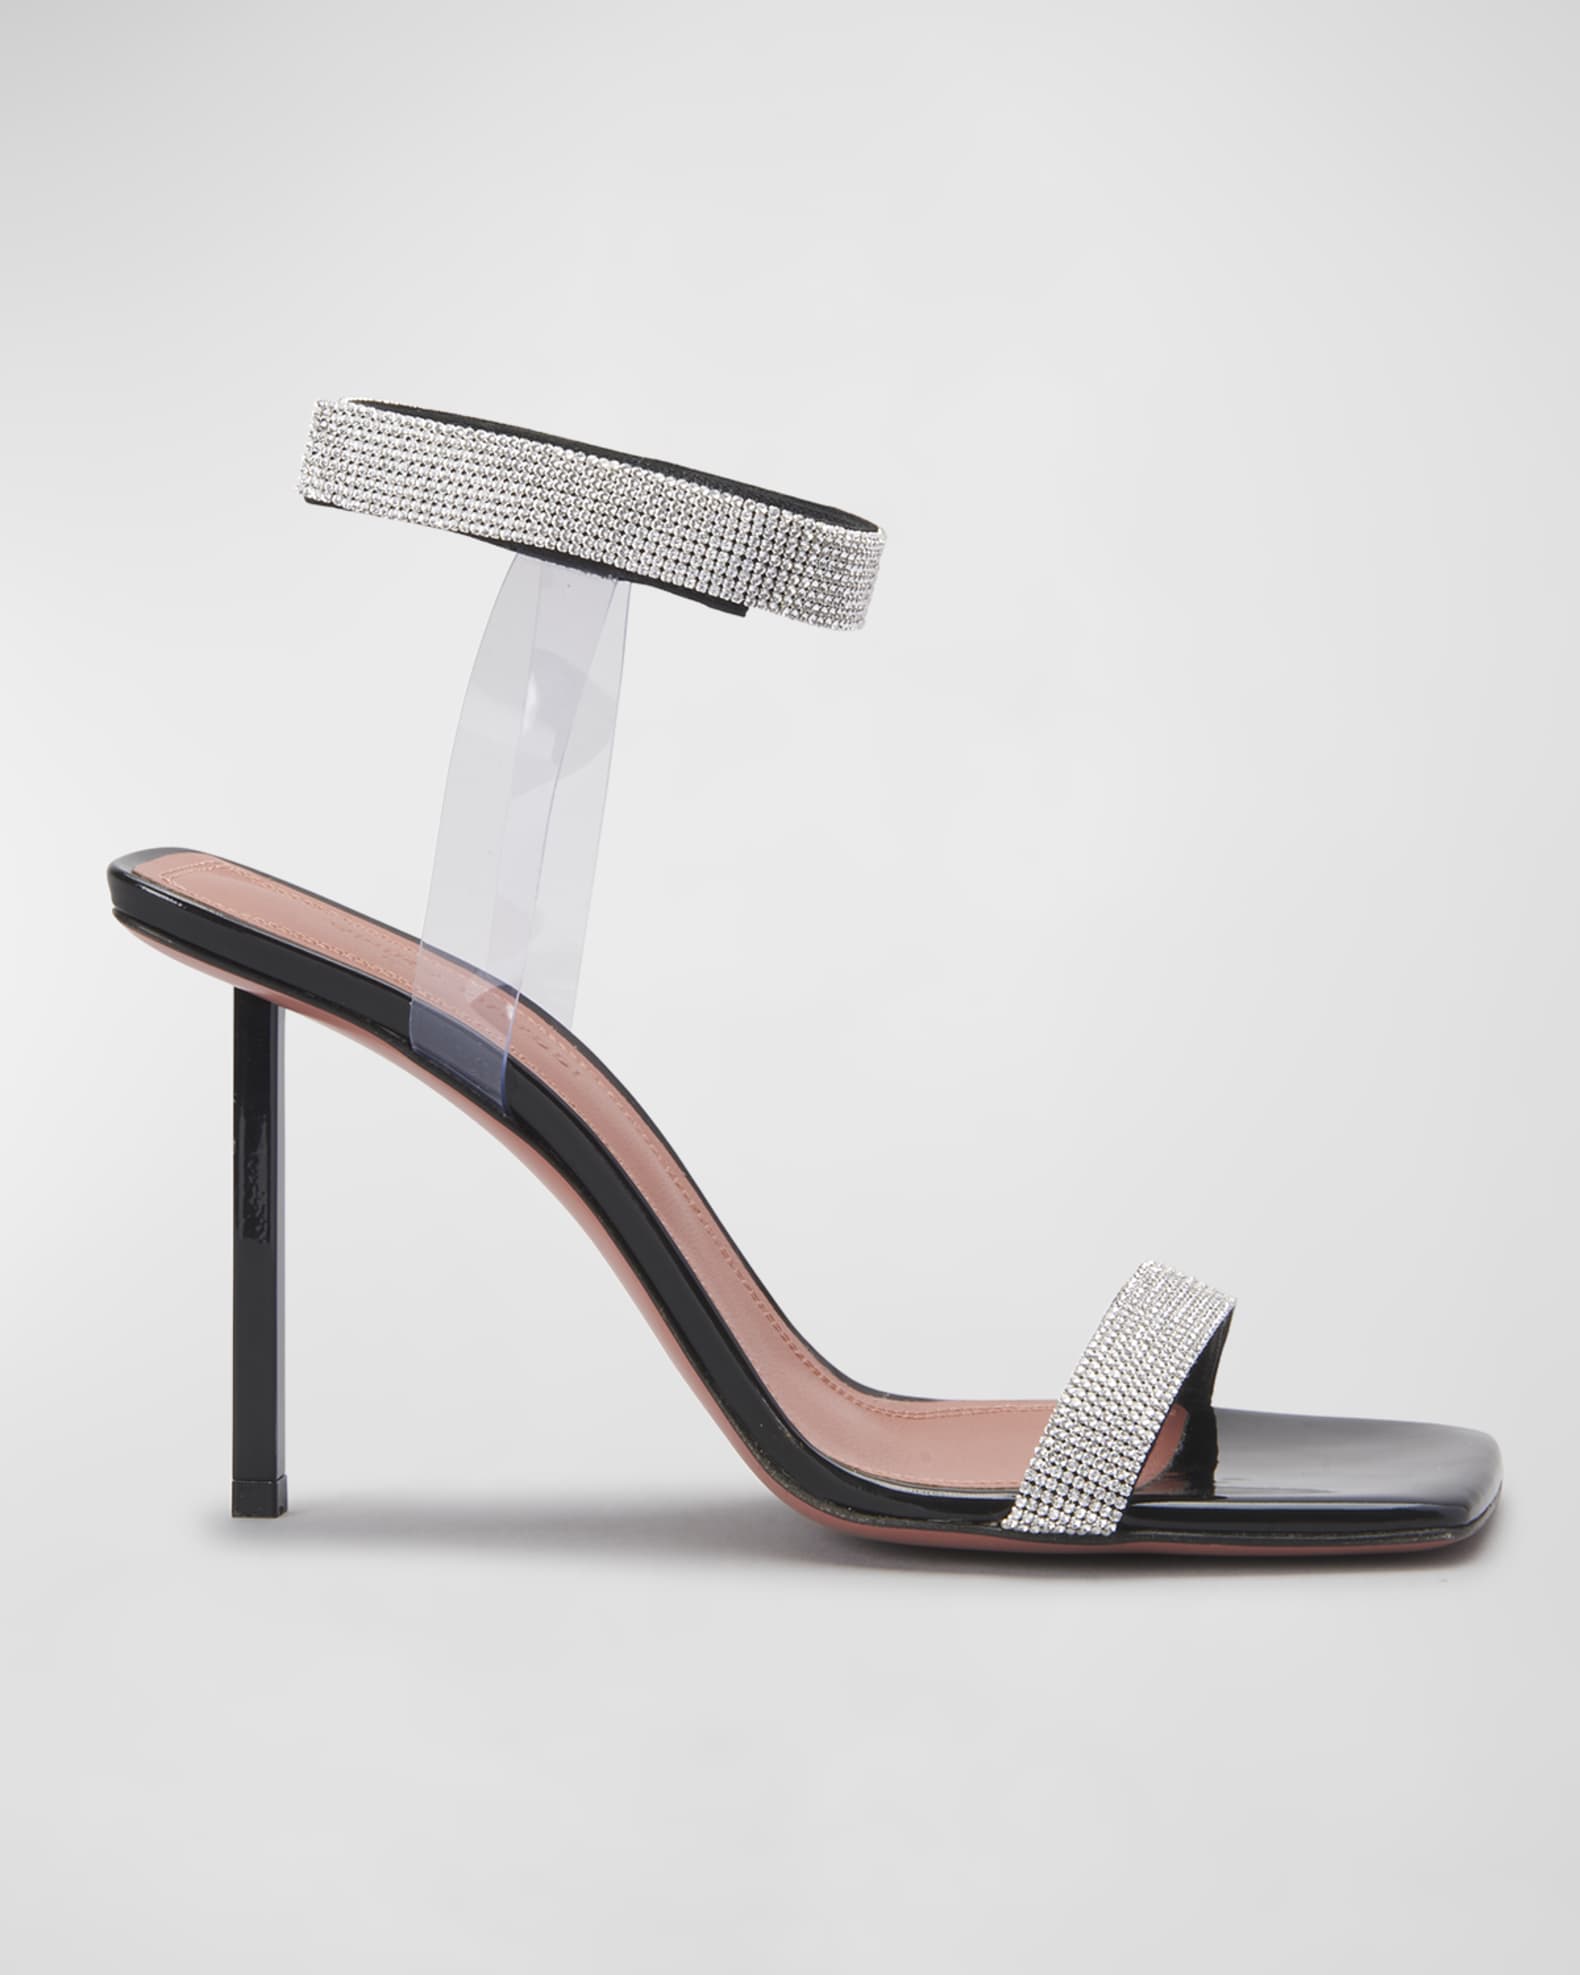 Rih Leather Crystal-Cuff Sandals | Neiman Marcus